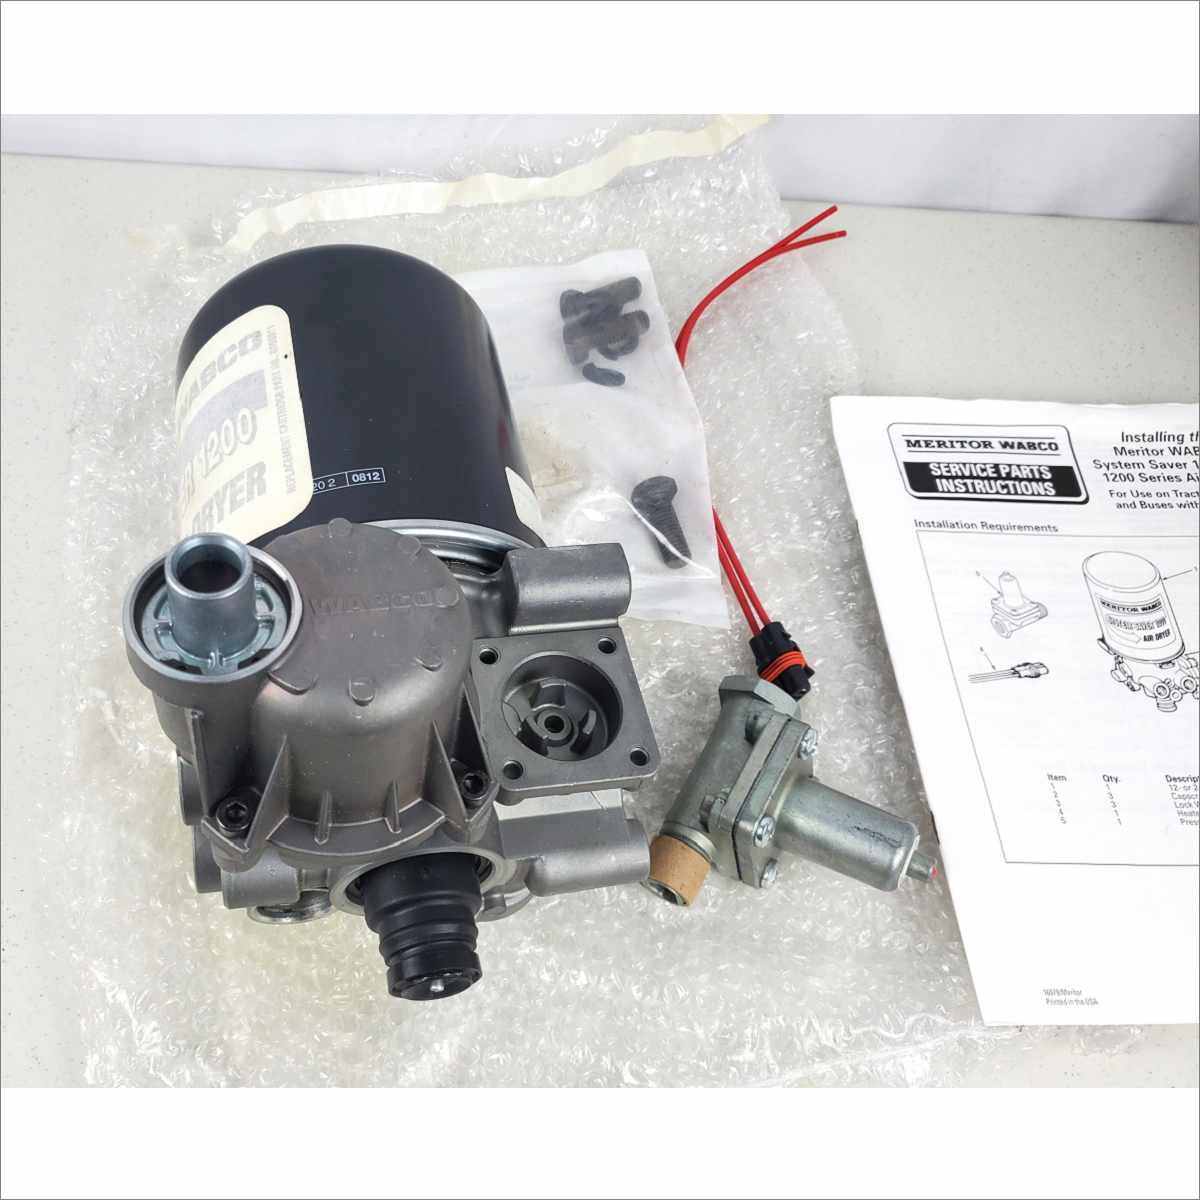 AIR DRYER ASSEMBLY REPLACES MERITOR WABCO SYSTEM SAVER 1200 SERIES R955205 